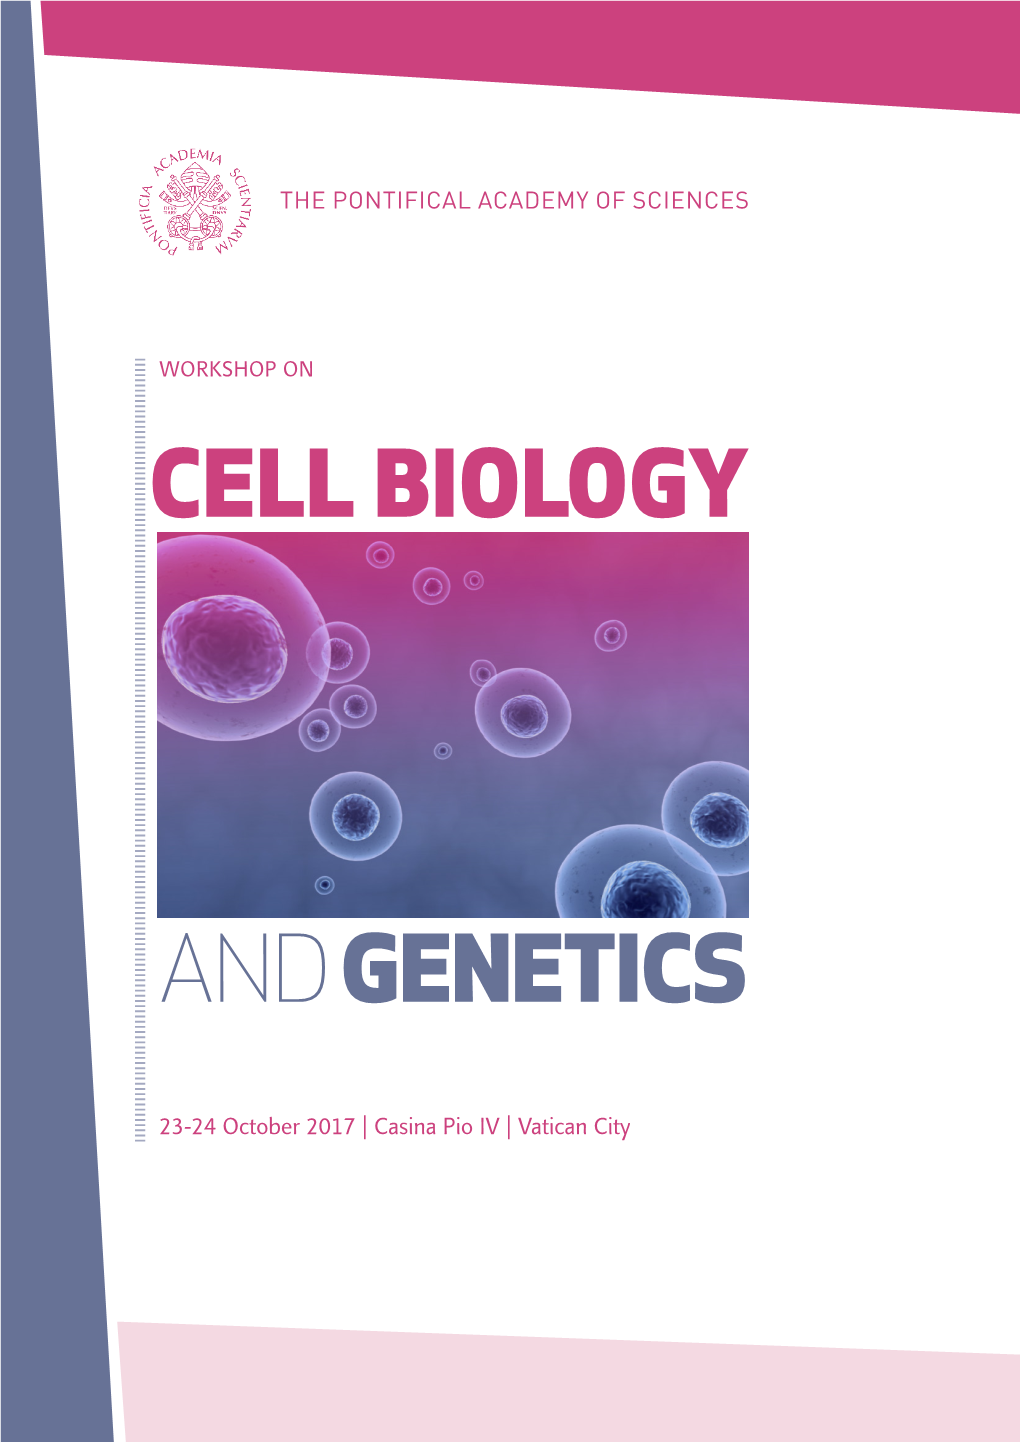 Cell Biology and Genetics Introduction